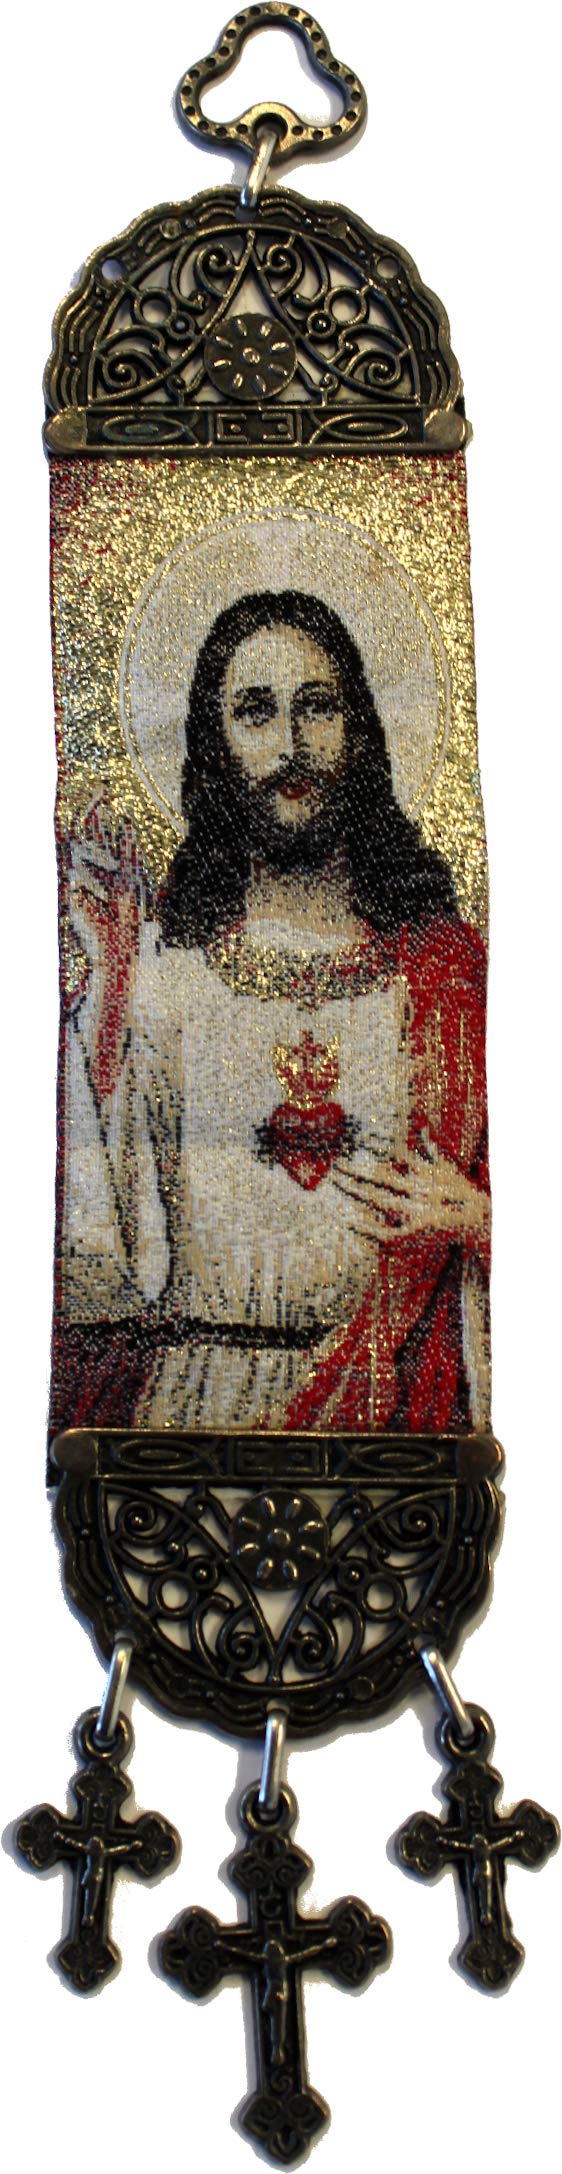 Holy Land Market Wall Hanging Tapestry with Heat Printing on Synthetic Cloth Decorated (9.5 x 2 Inches)